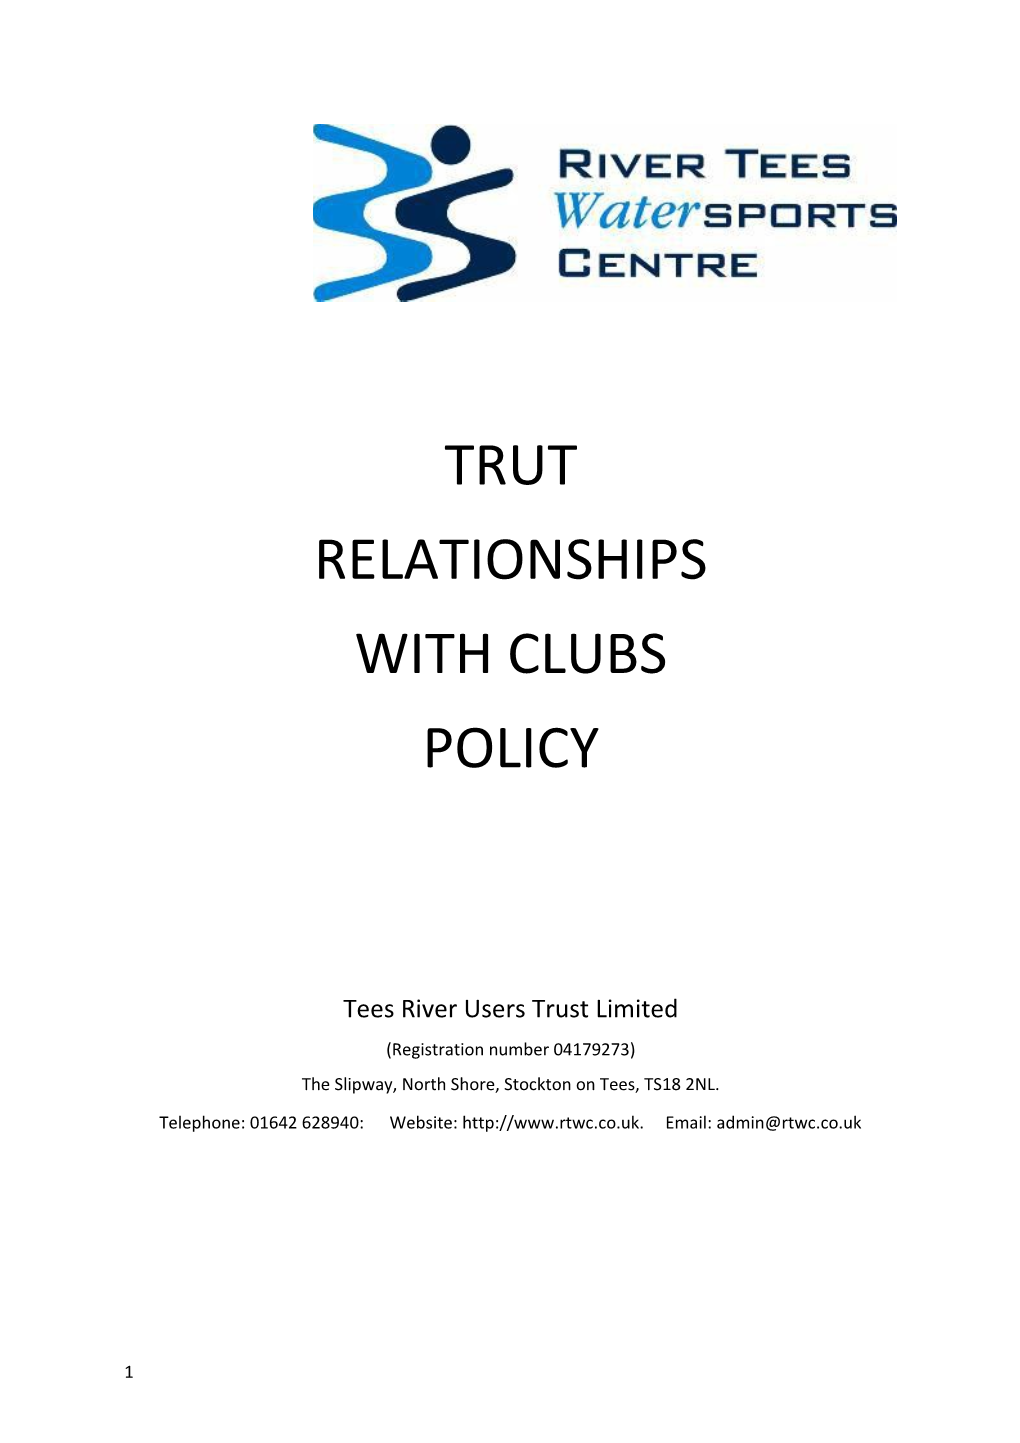 Tees River Users Trust Limited